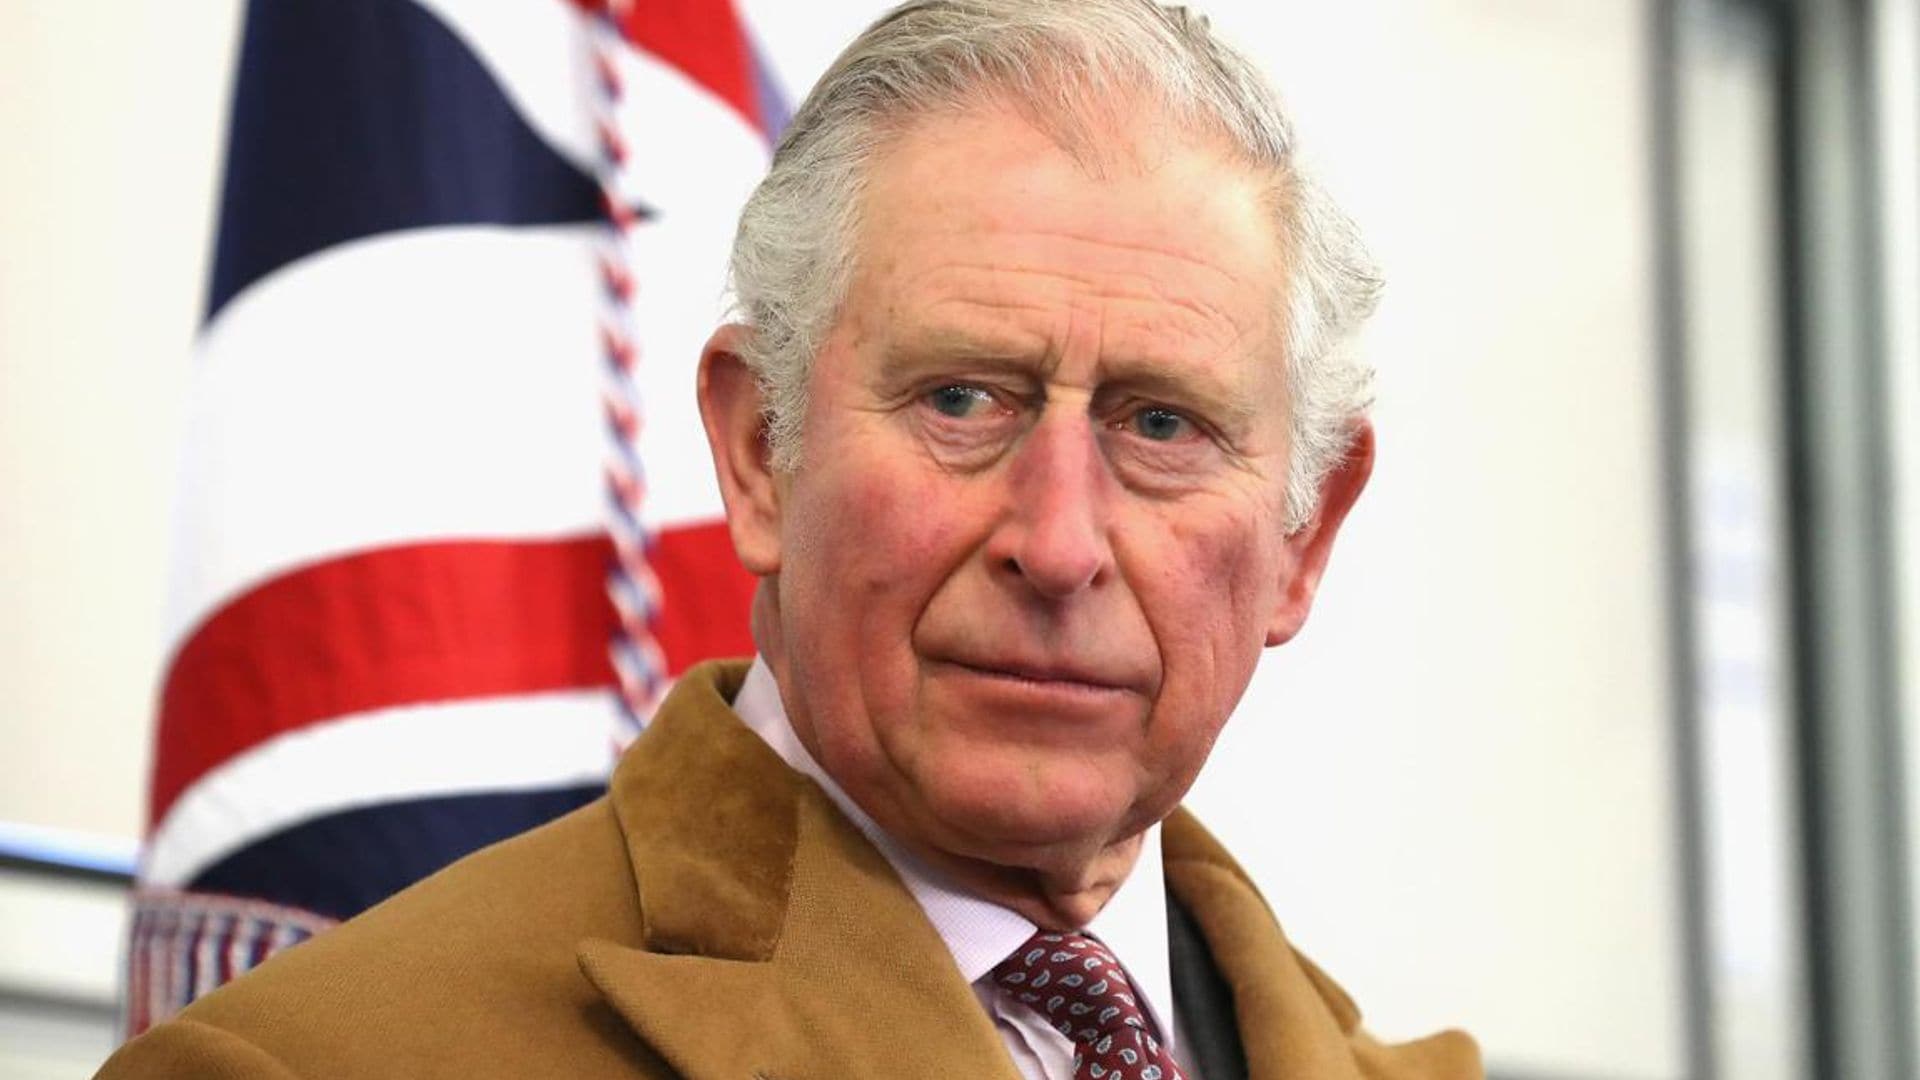 Coronavirus-infected royal attended same event as Prince Charles